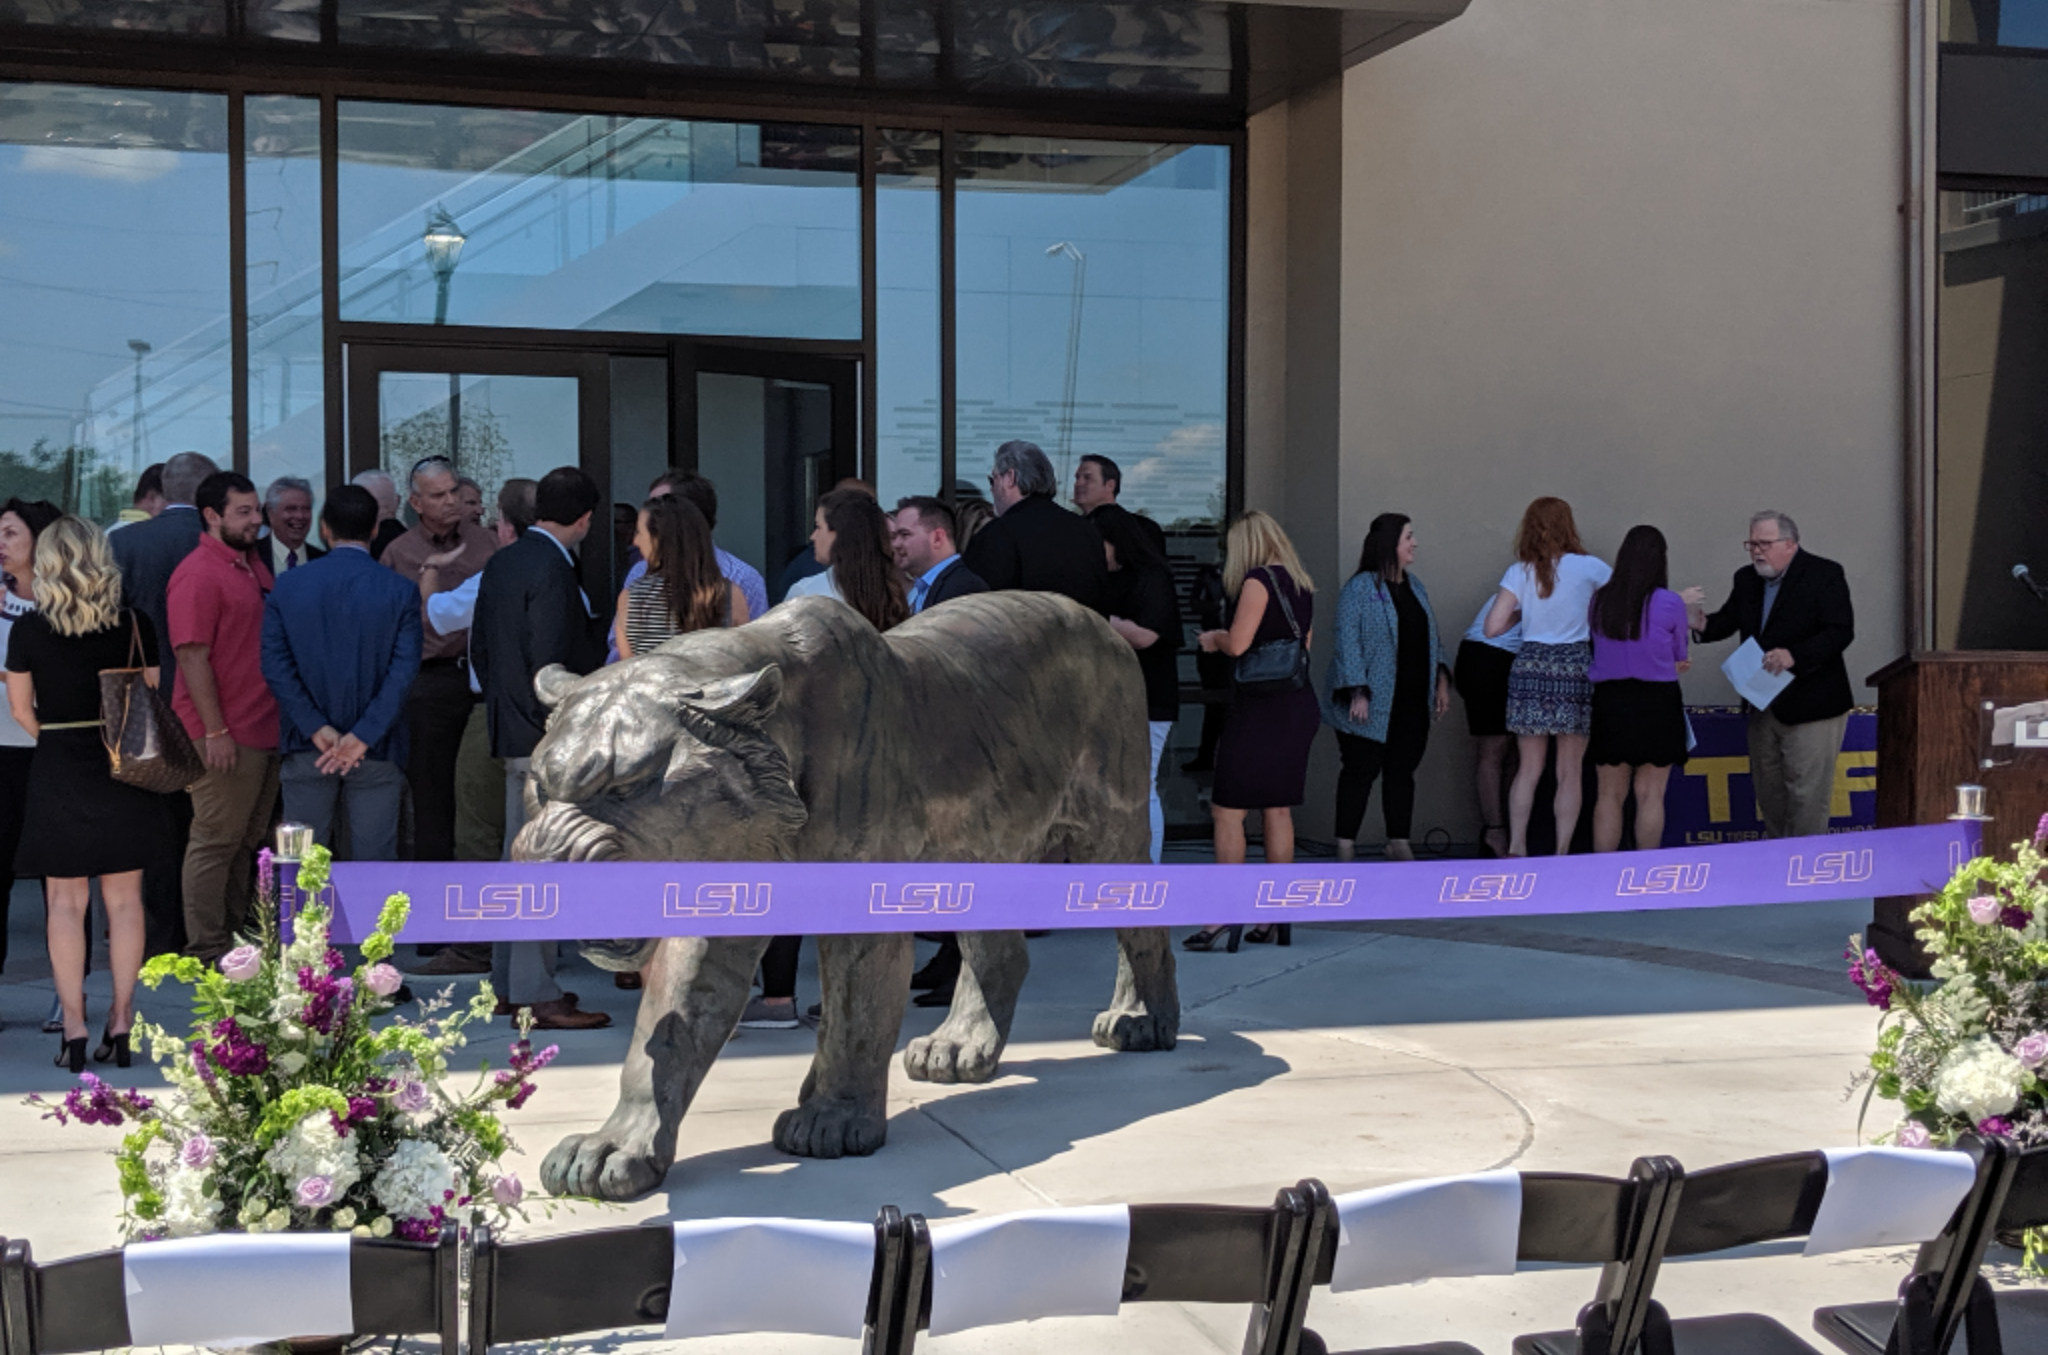 LSU Football Cuts Ribbon on $28 Million Football Facility and Performance Nutrition Center